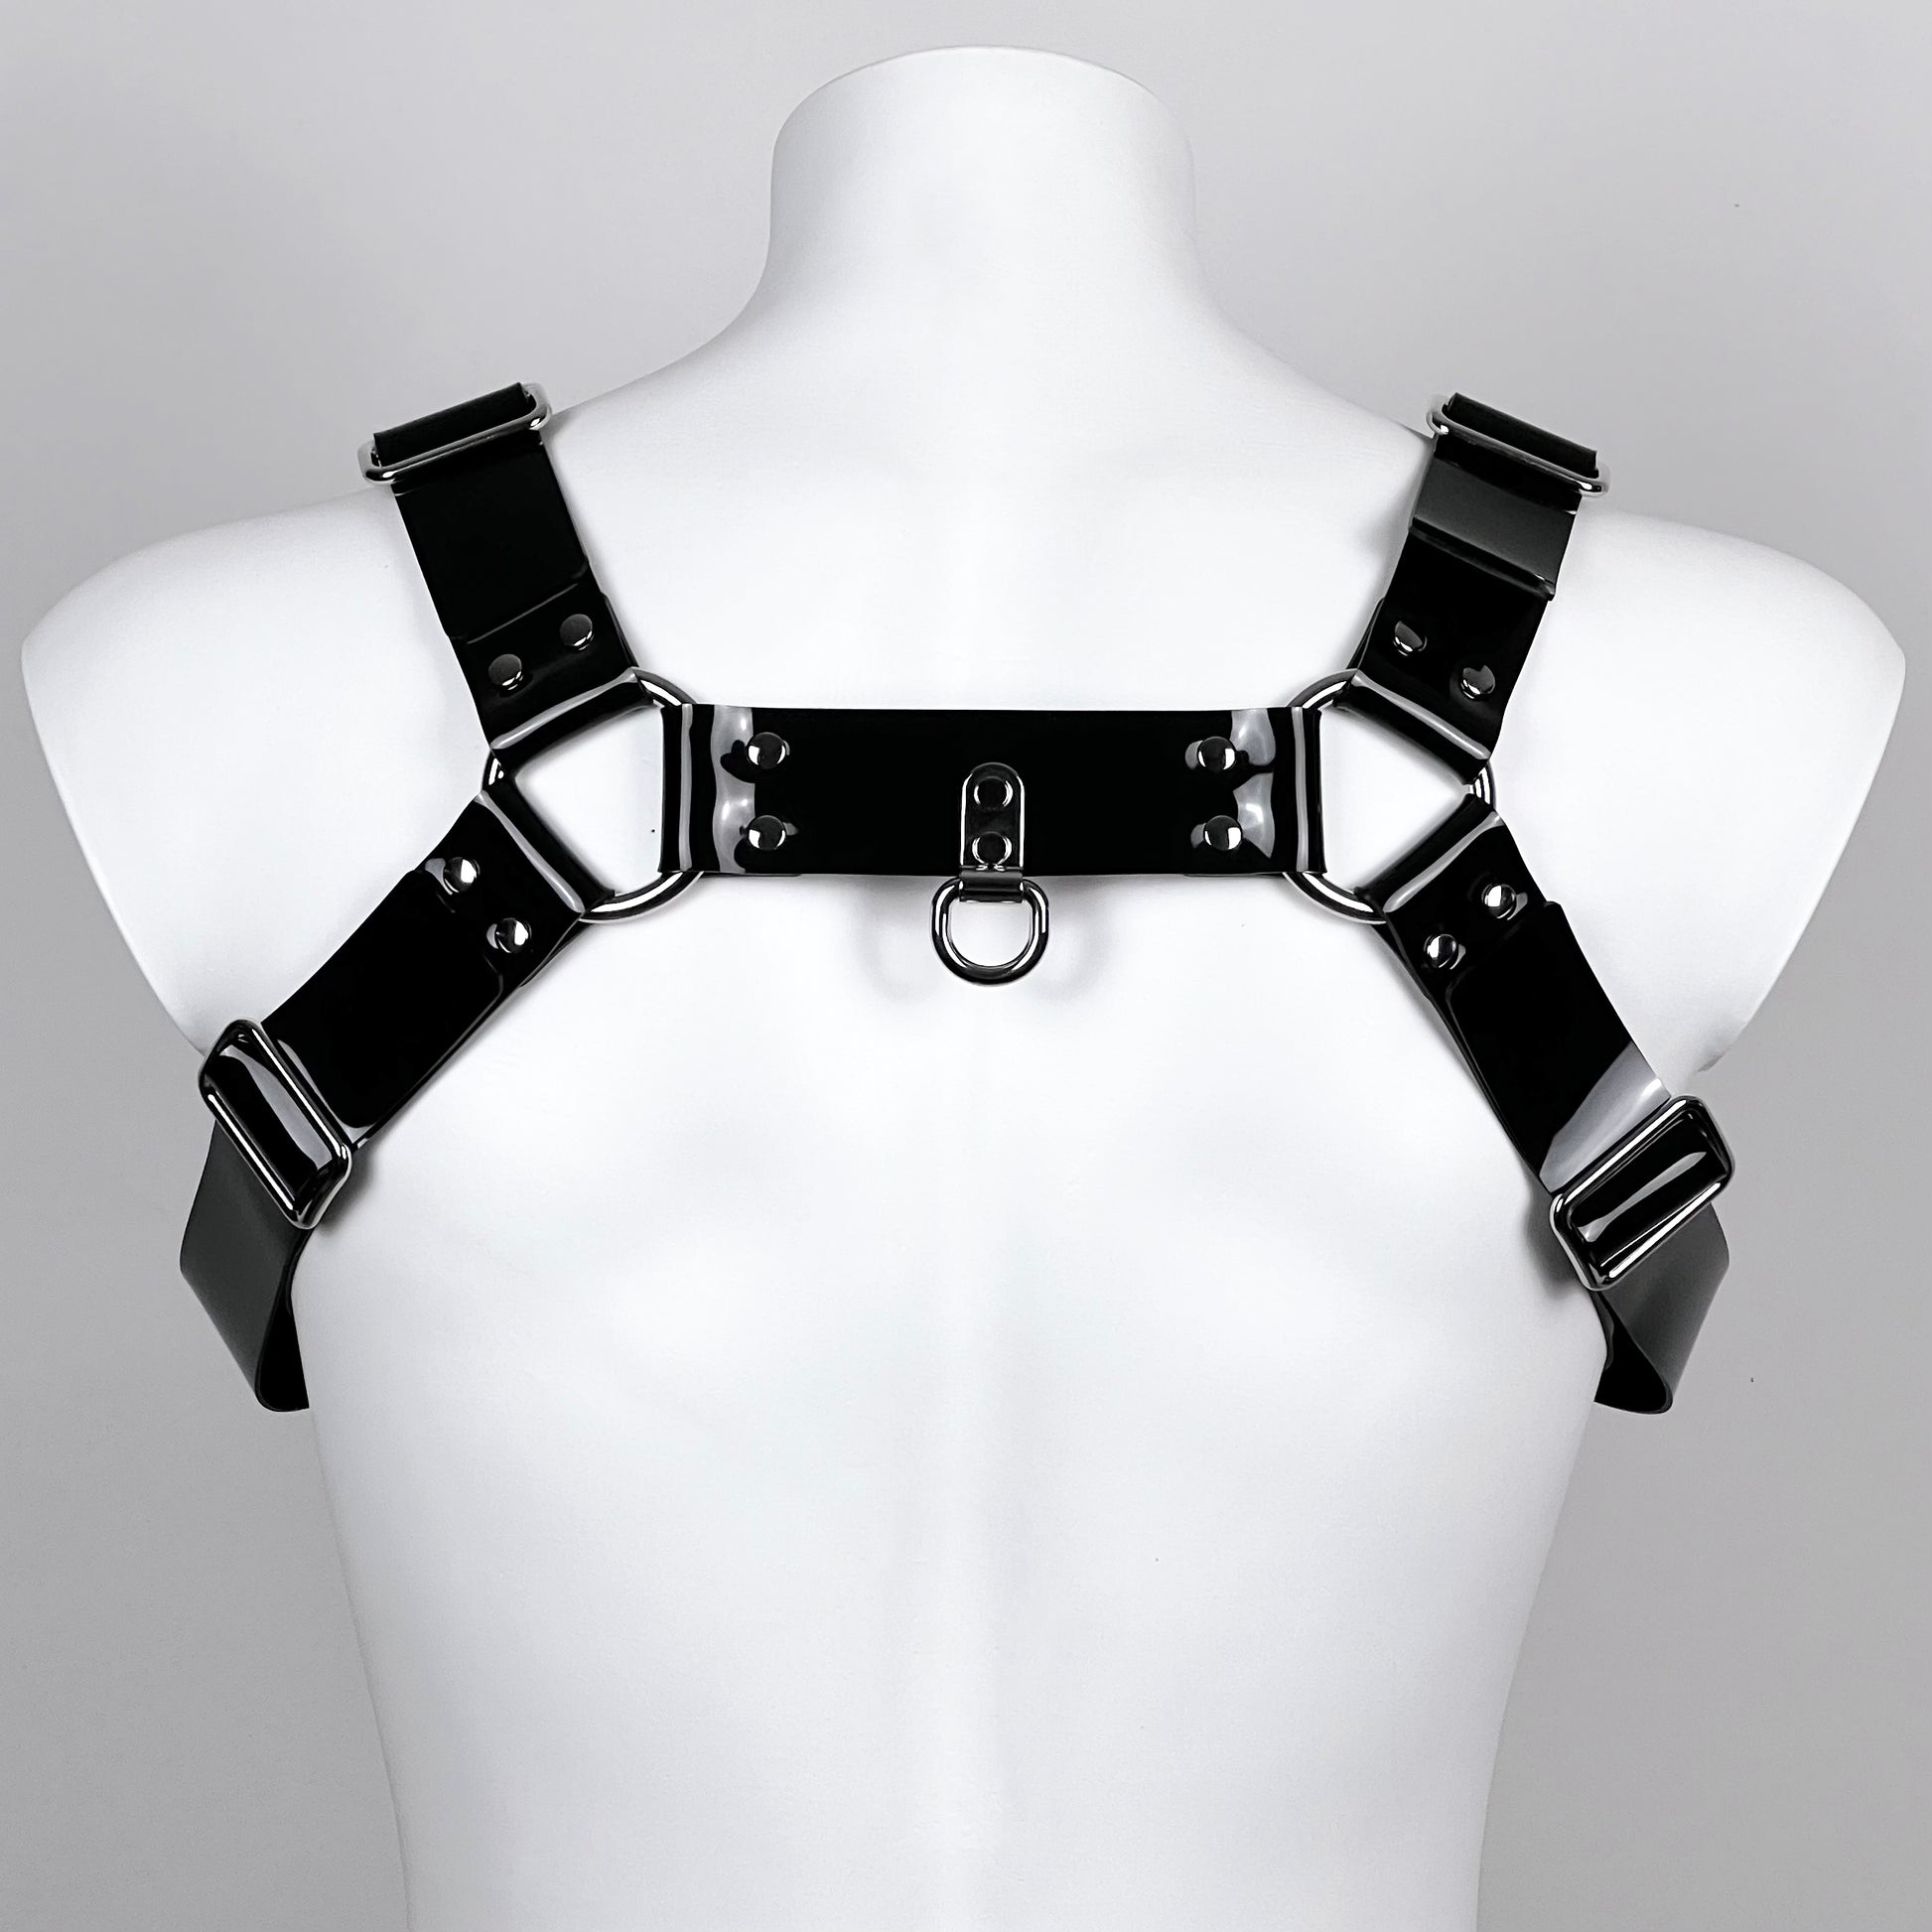 BDSM harness in black PVC with metallic buckles